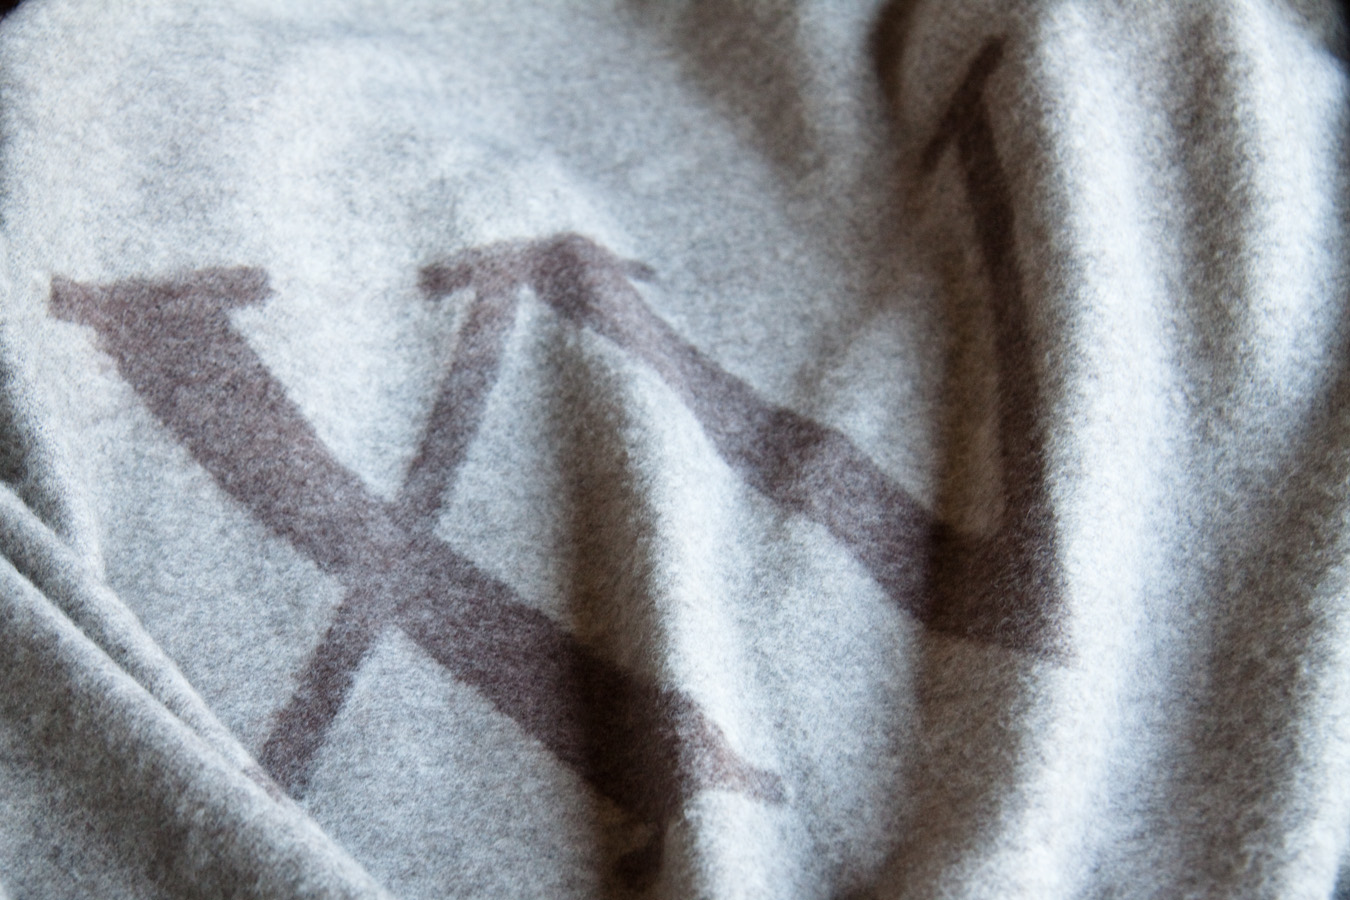 Fifteen Beacon Logo on our cashmere throws that come from Milan.